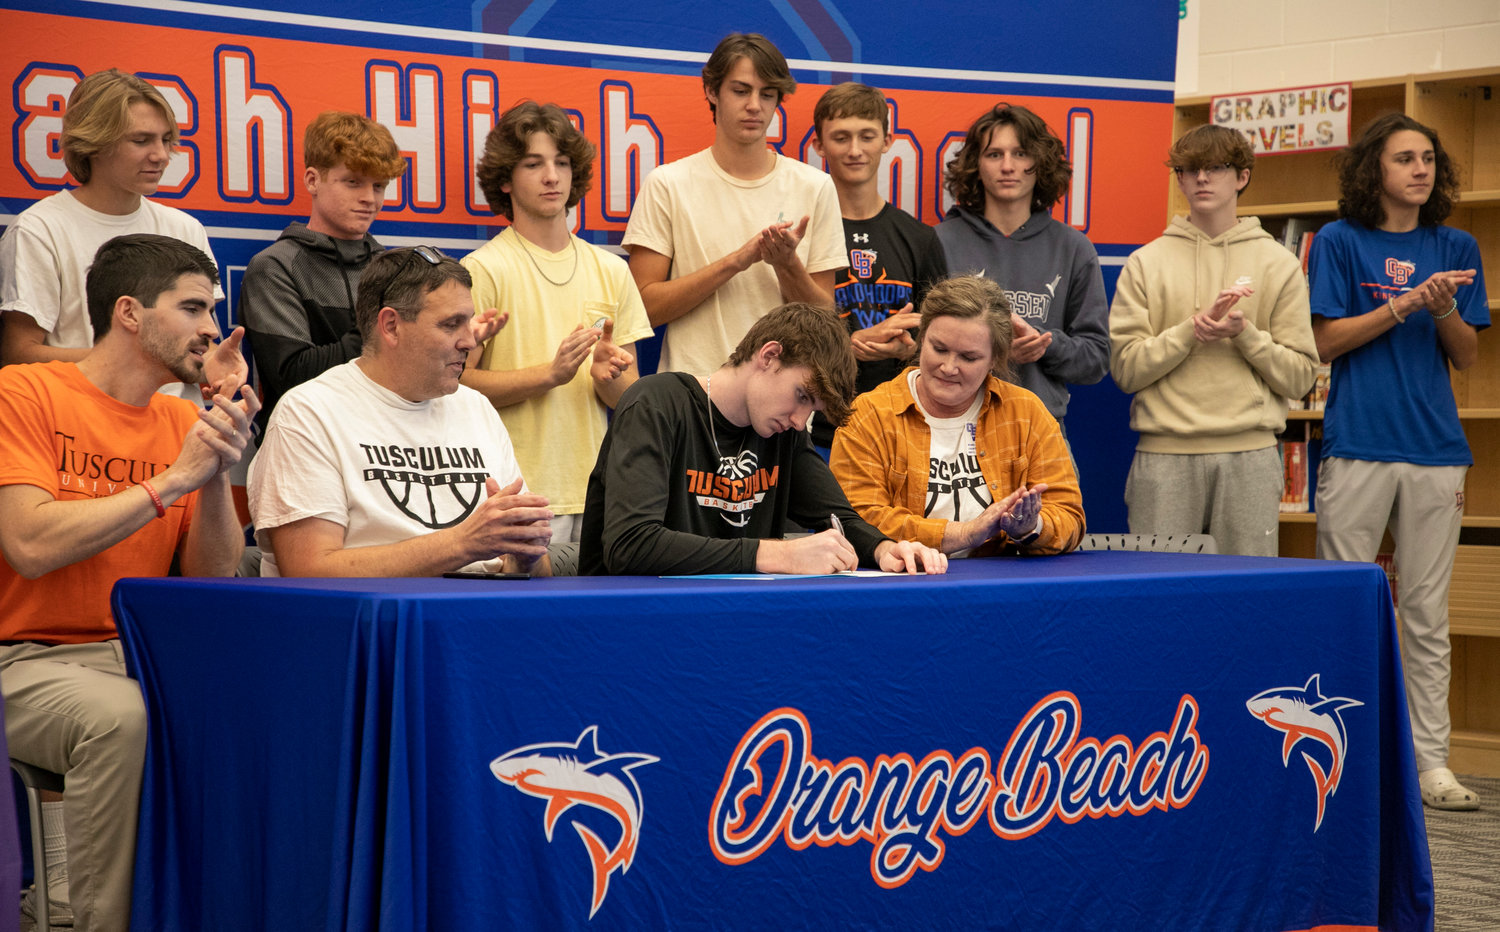 Mako senior Joey Robertson puts pen to paper to ink the commitment he made to the University of Tusculum basketball program Sept. 10 during Monday afternoon’s signing ceremony at Orange Beach High School. Robertson, the first Mako basketball player named all-state, became the first from Orange Beach to sign with a college basketball team.